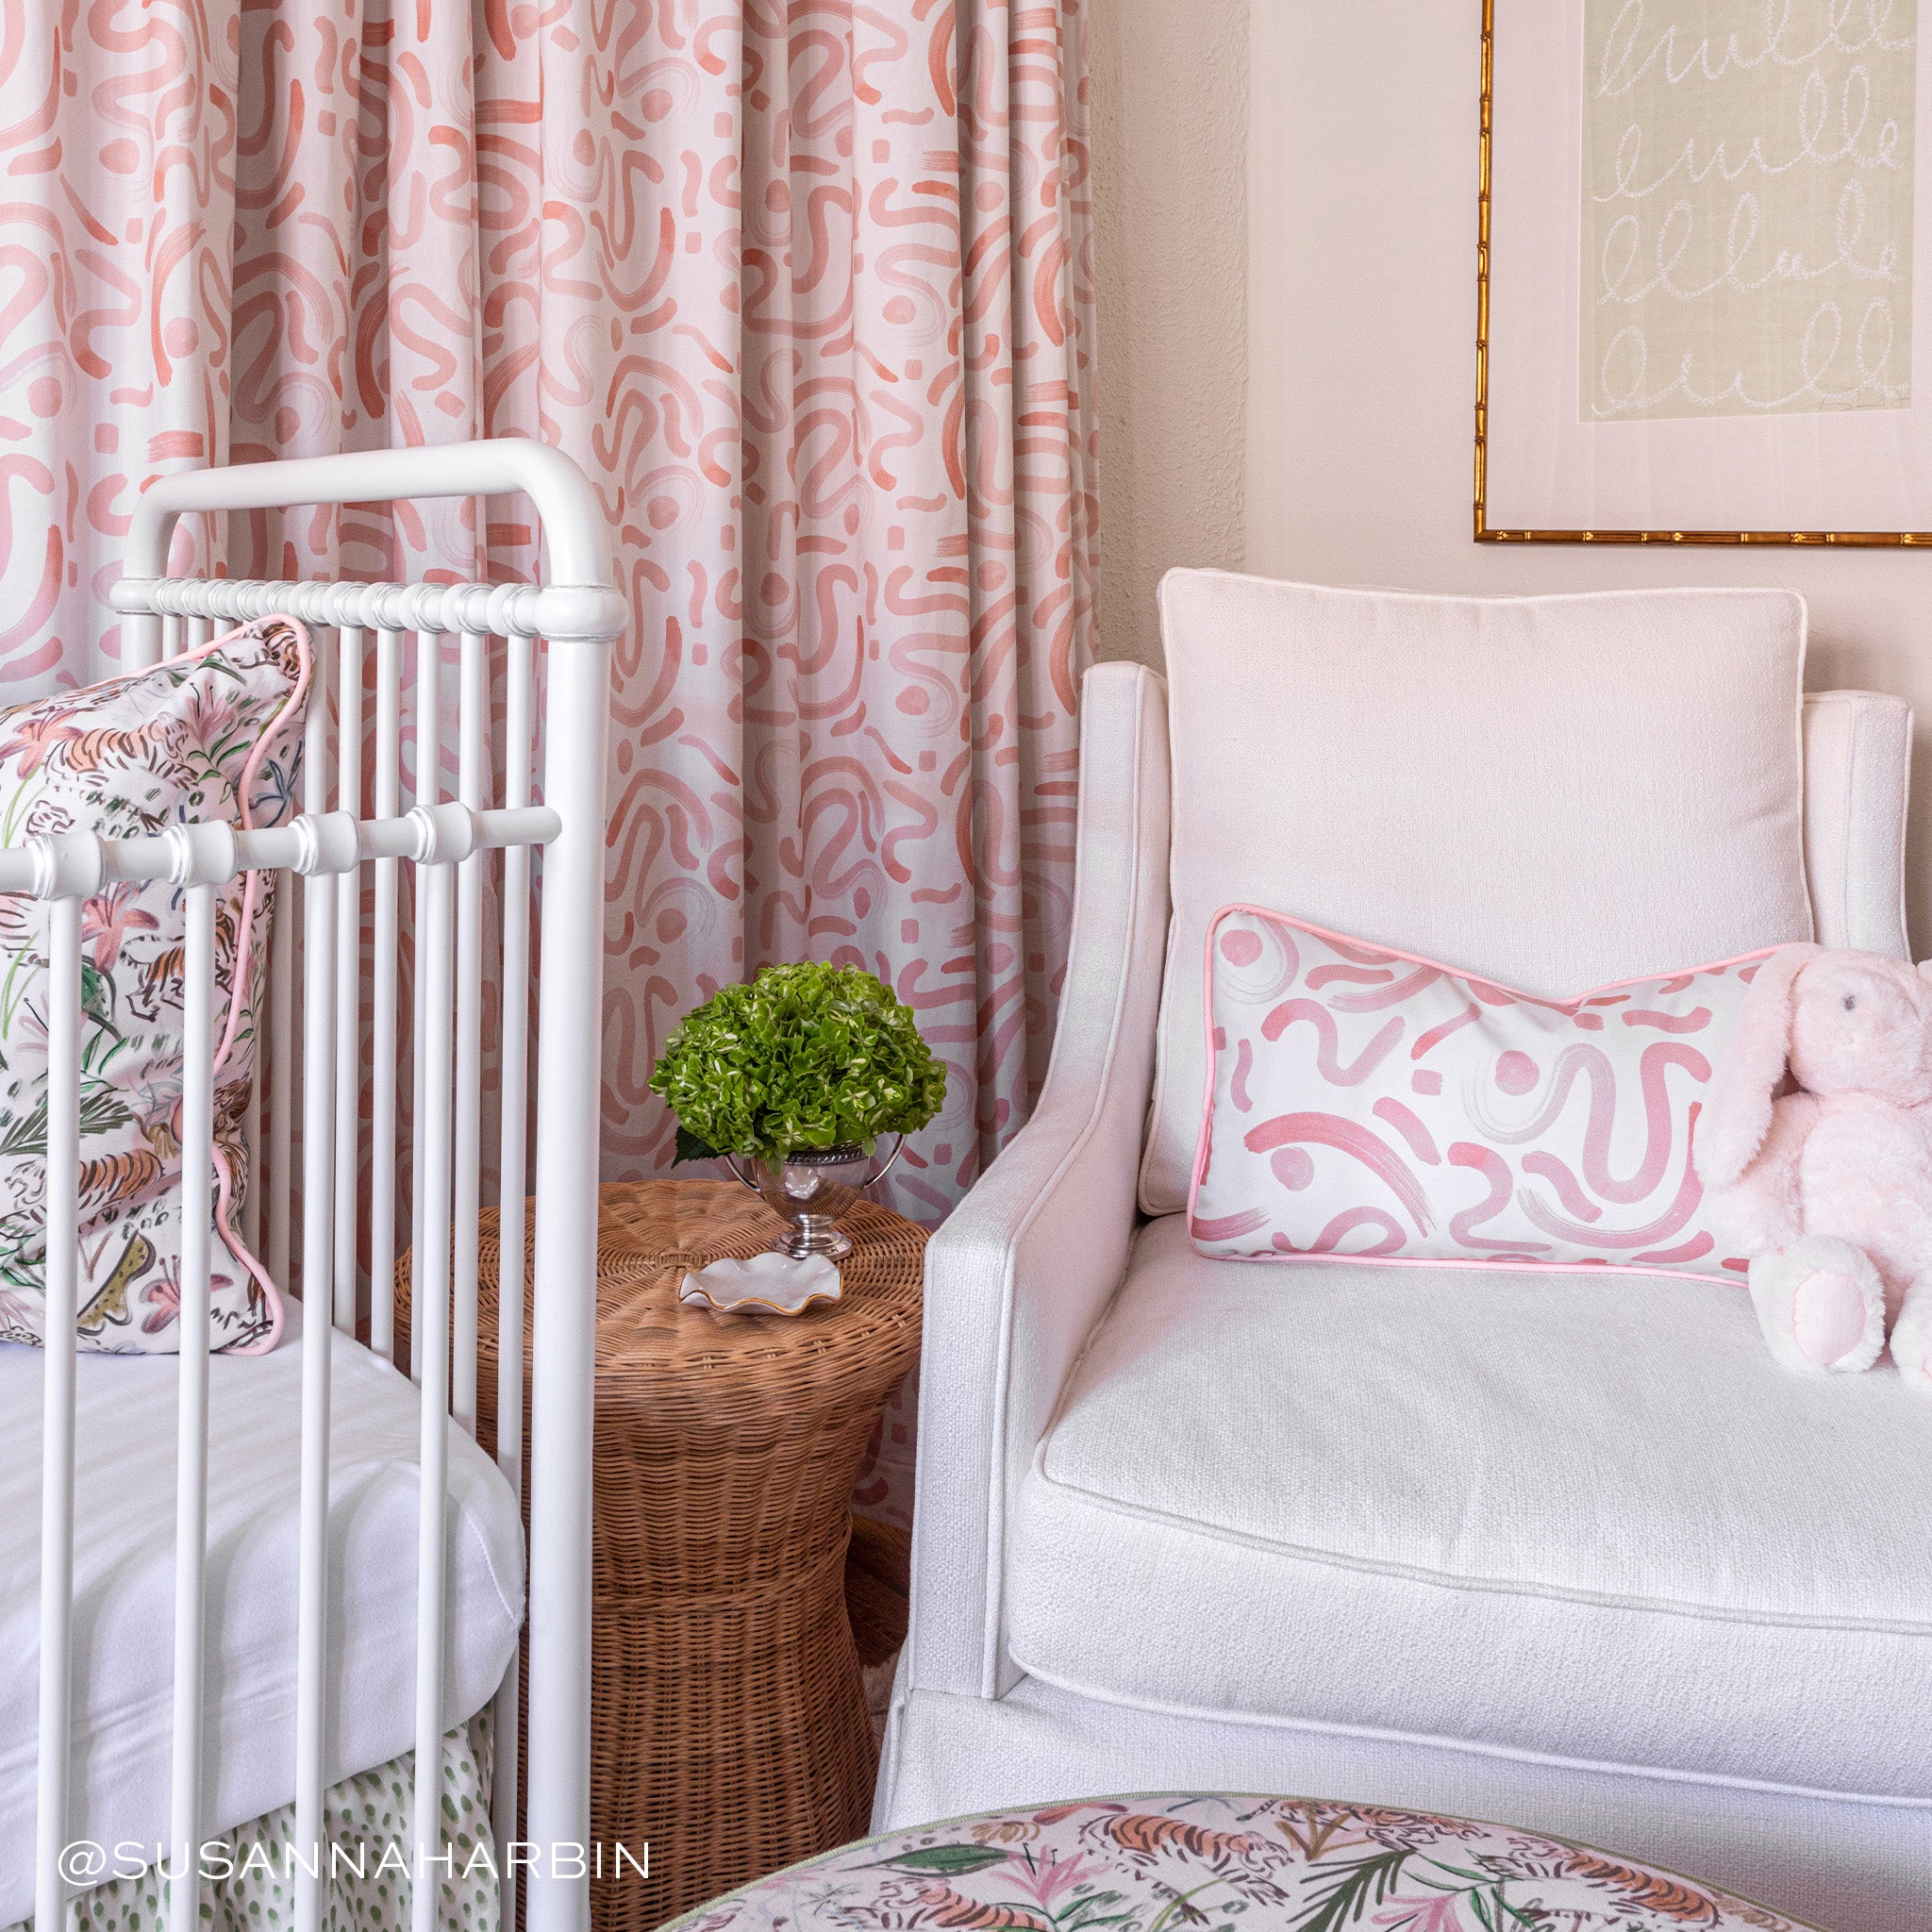 Nursery room corner styled with Pink Graphic Printed Lumbar on Pink Sofa Chair next to white crib with Pink Chinoiserie Printed Pillow. Photo taken by Susanna Harbin Interiors